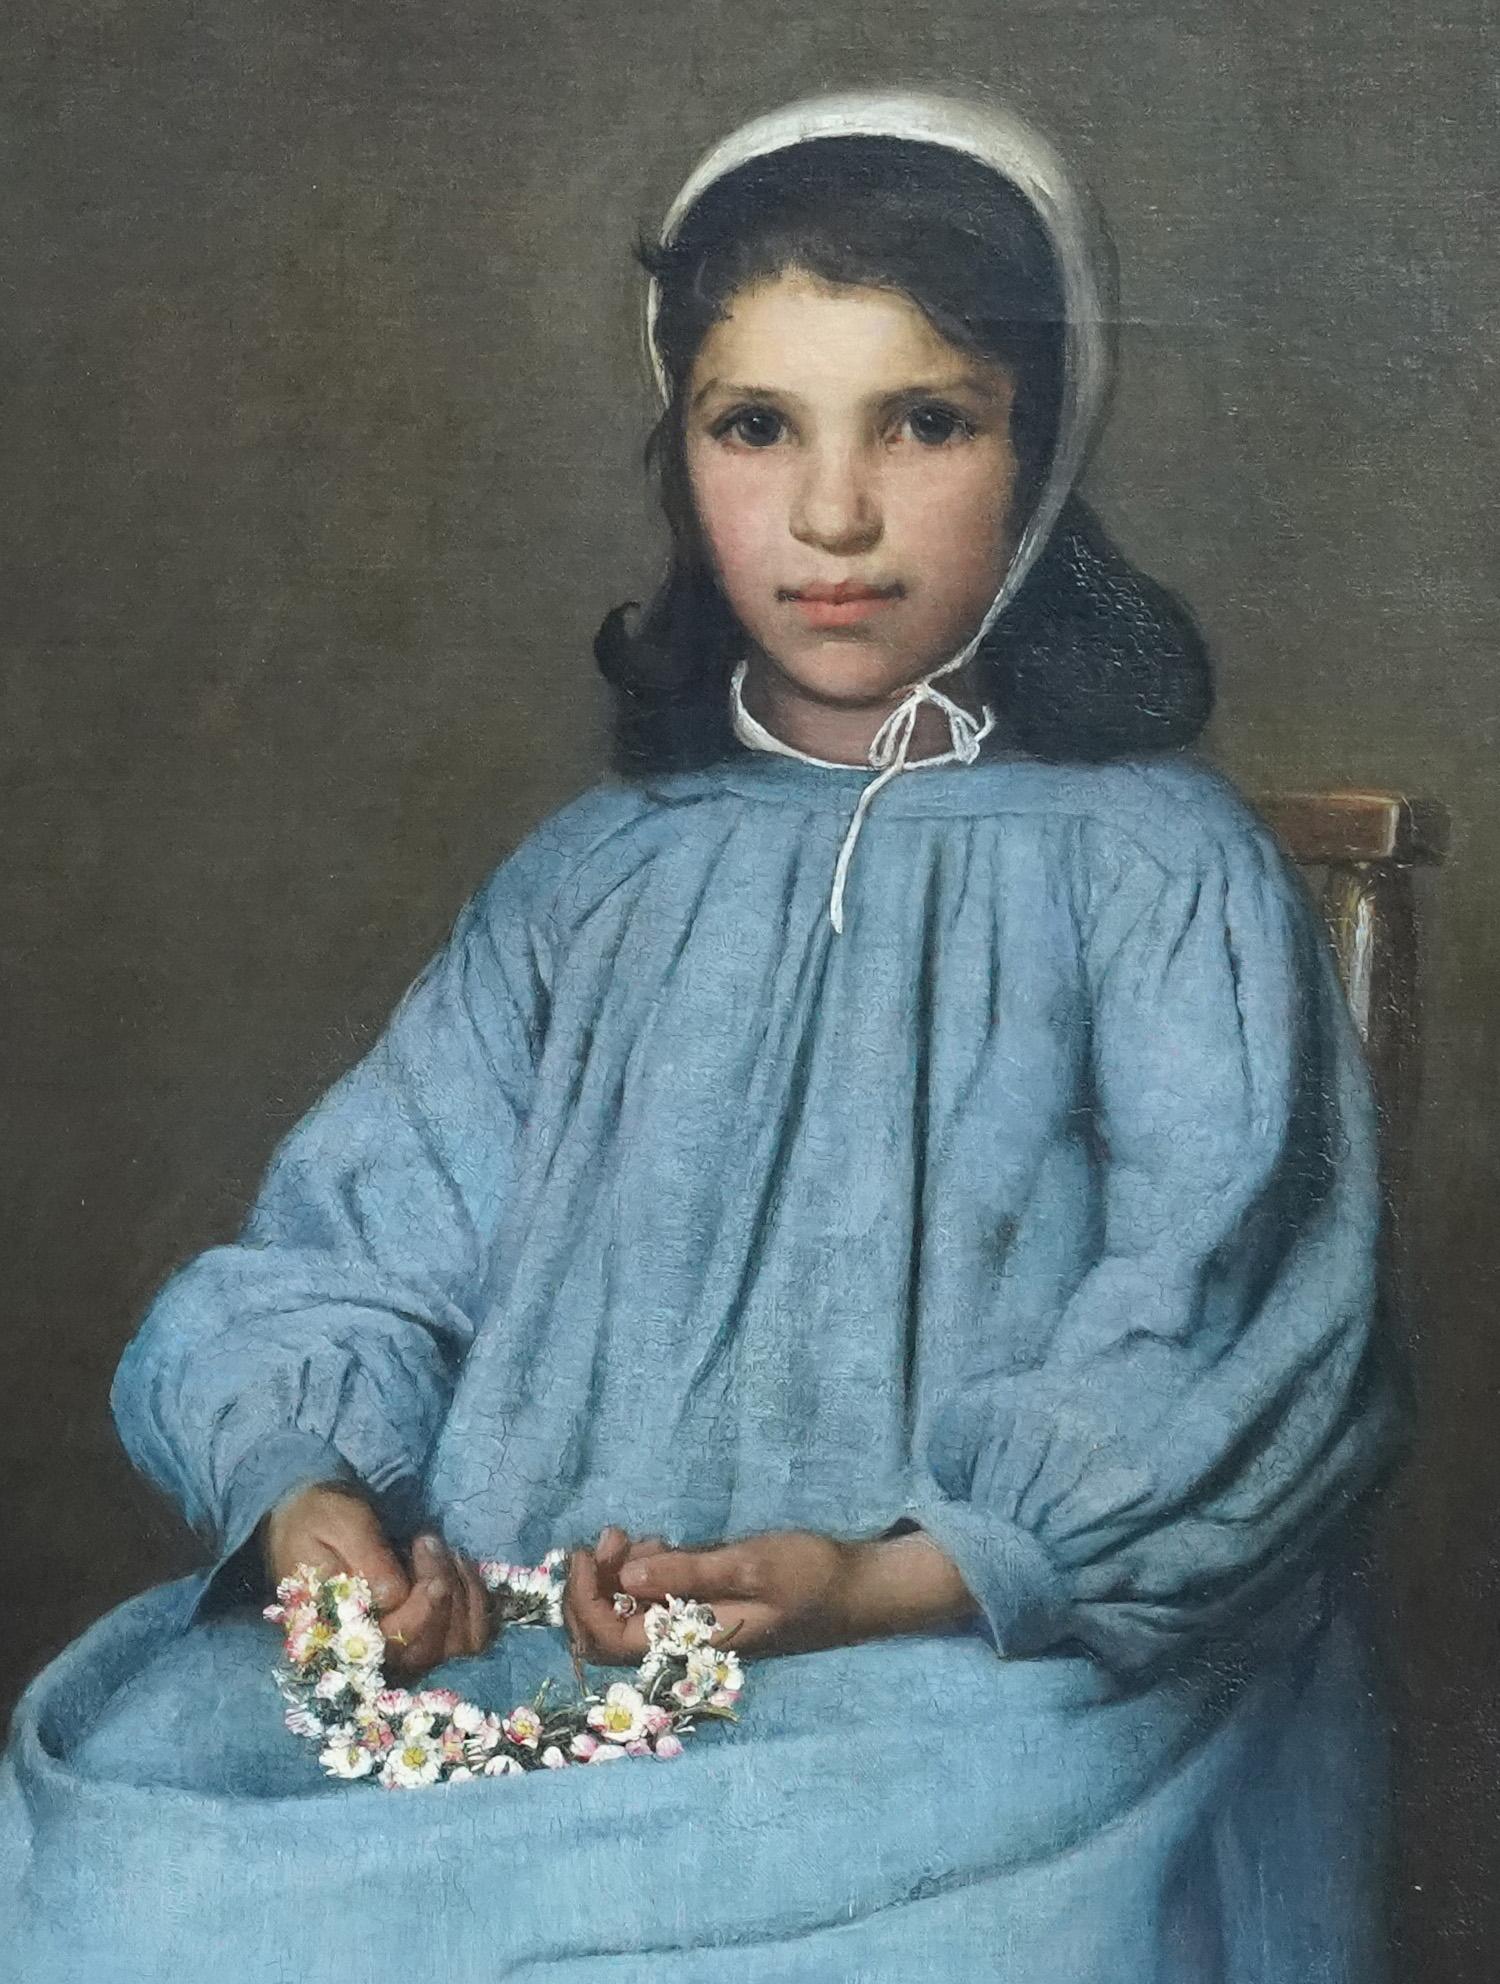 This is a superb French Breton School portrait oil painting painted circa 1880. The painting is a three-quarter length seated portrait of a young girl. She is wearing an eggshell blue dress, so often seen in Breton portraits such as that by Stanhope